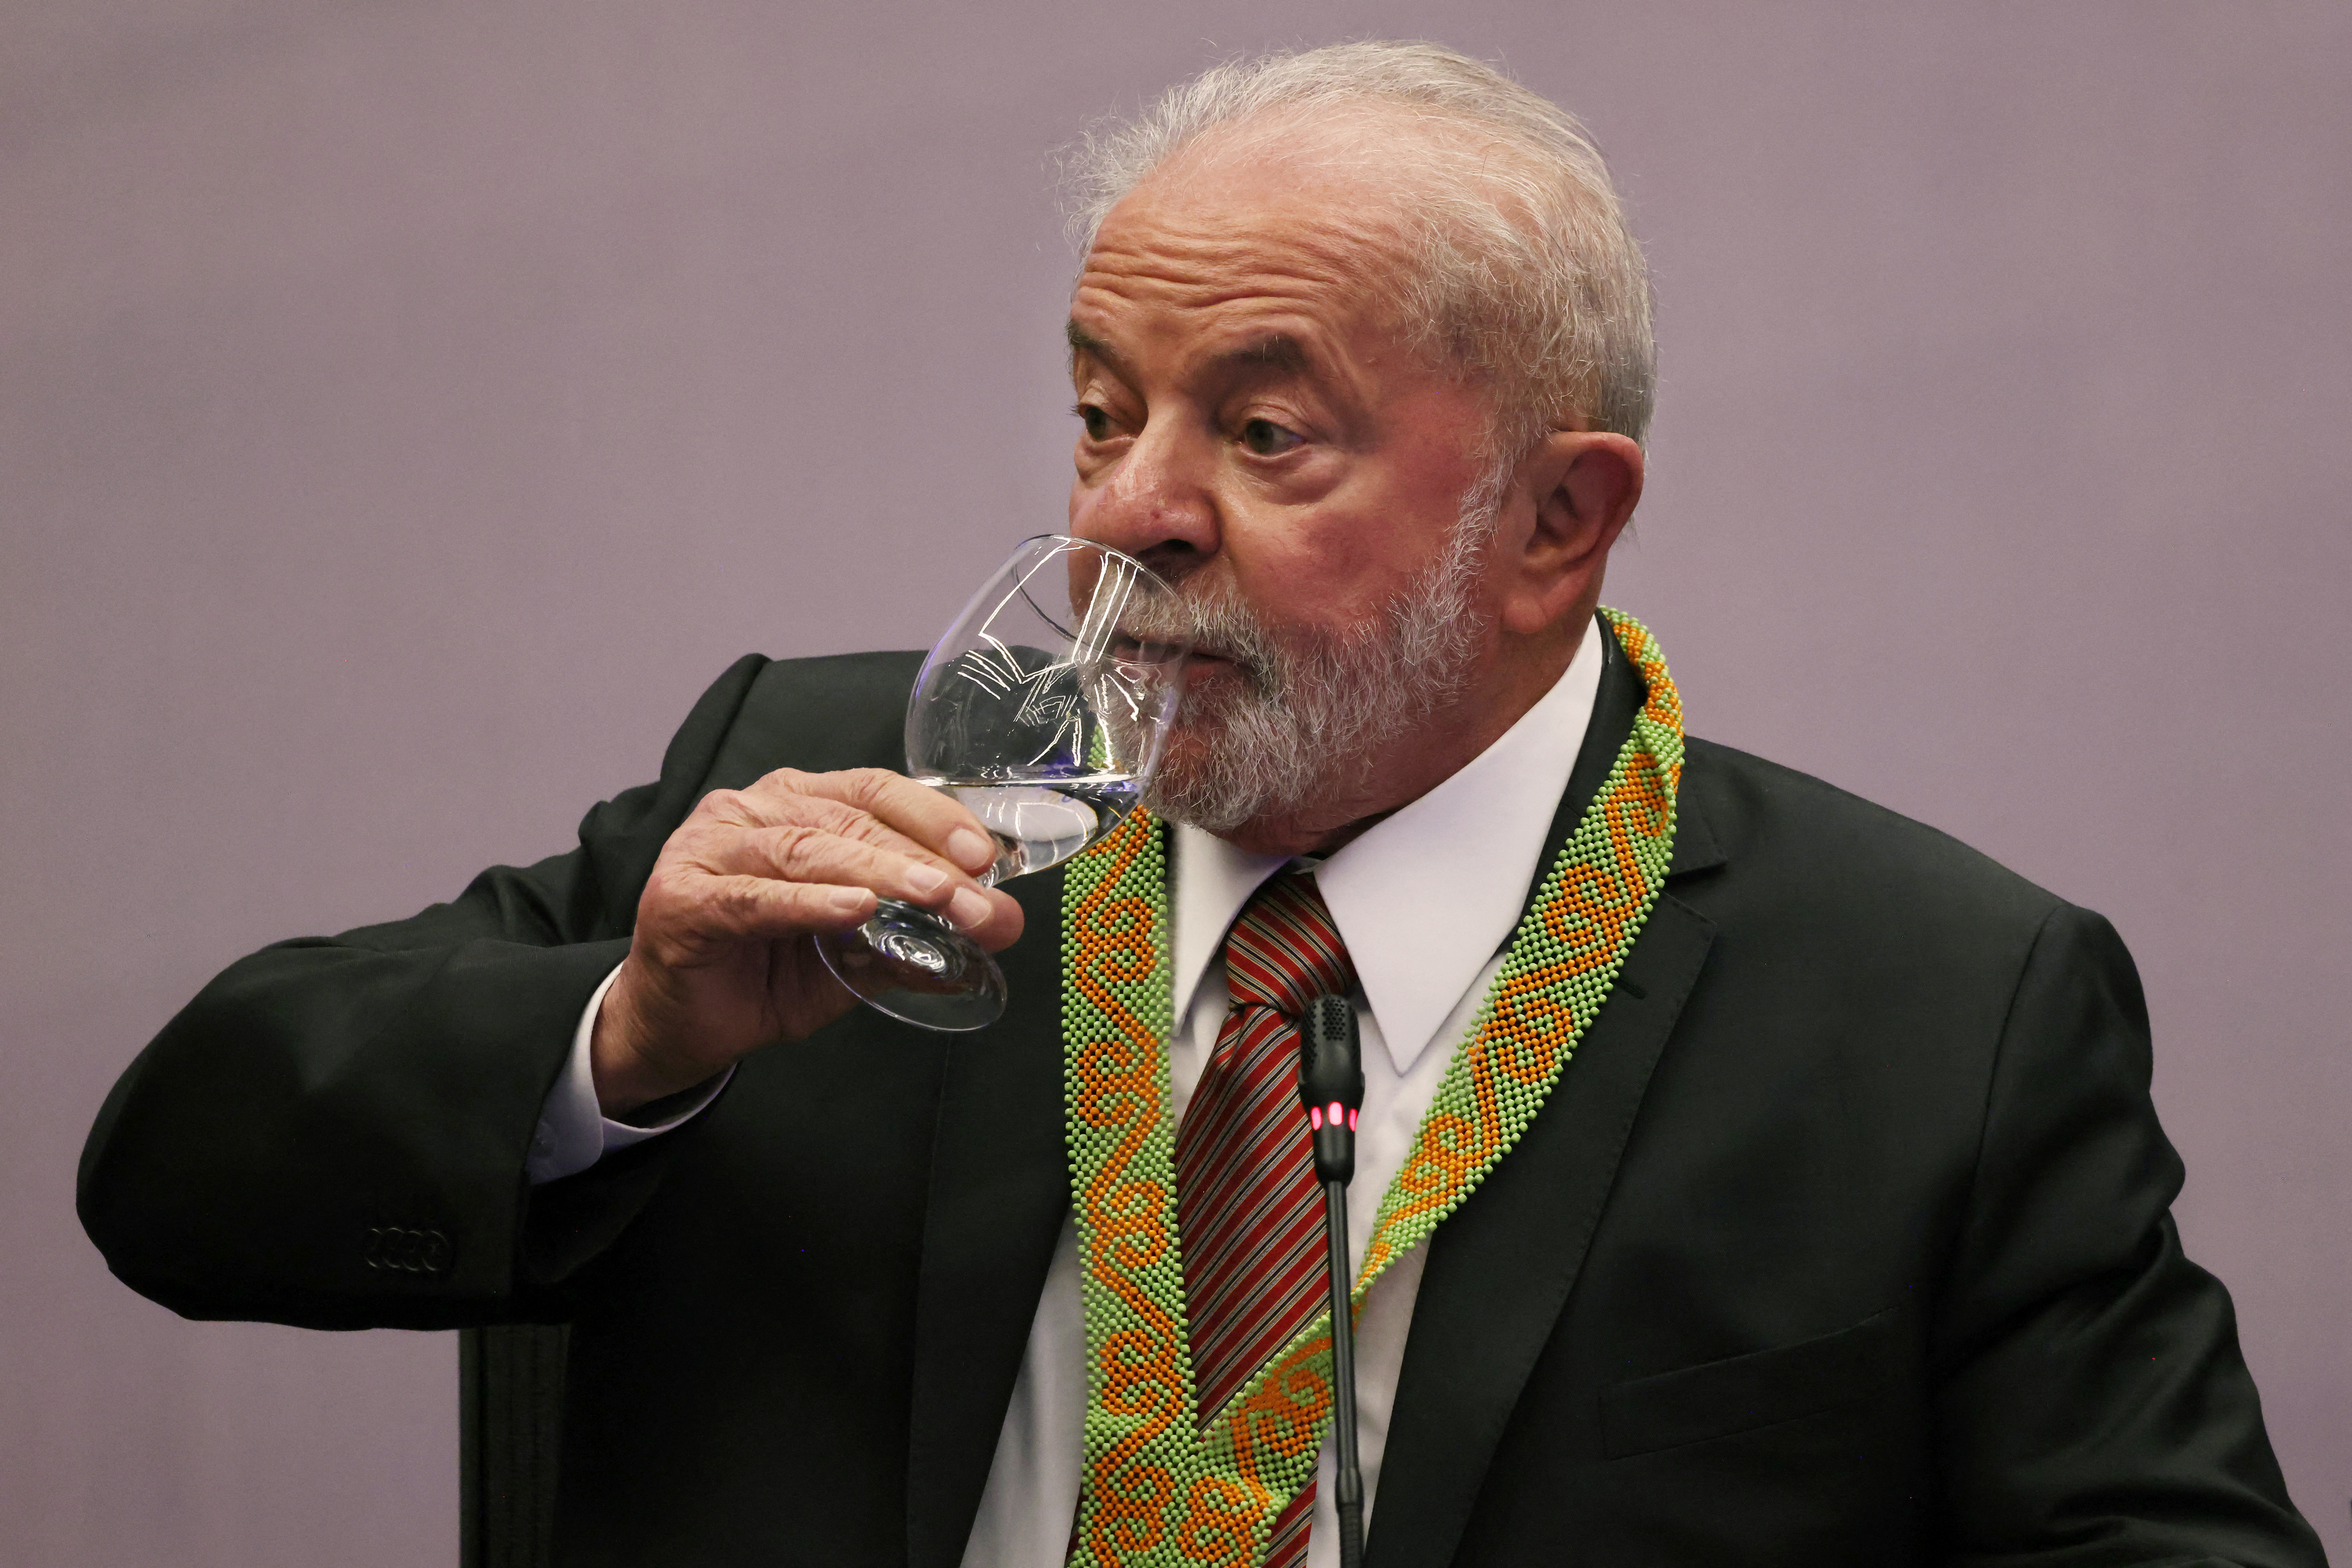 Brazilian President-elect Luiz Inacio Lula da Silva drinks wine during an event with representatives of Brazil's indigenous peoples at the COP27 climate conference in the Red Sea resort city of Sharm el-Sheikh, Egypt, on November 17, 2022.  (Photo by Ahmed Garabli/AFP)